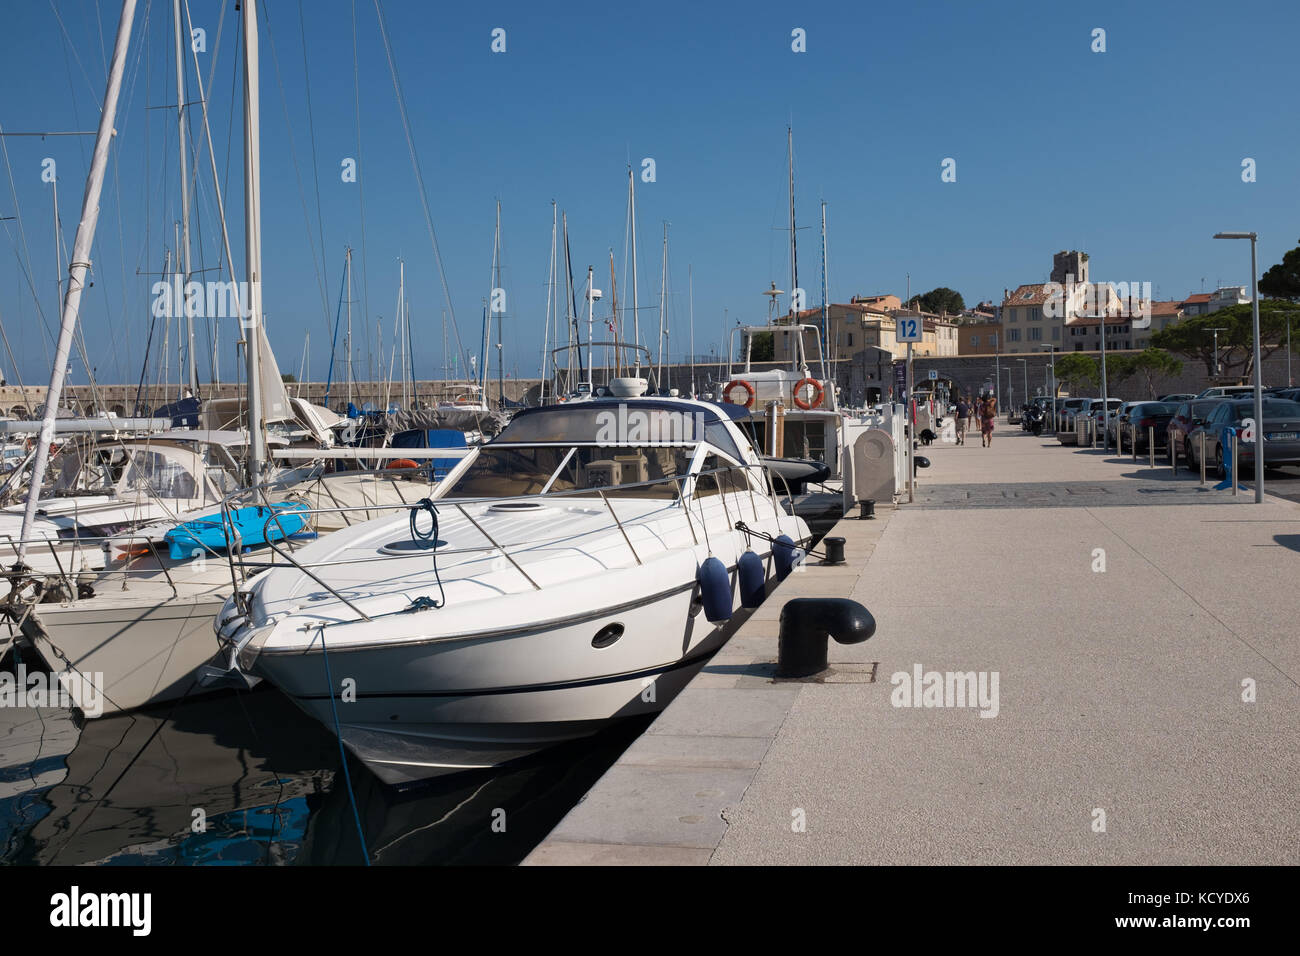 Boats moored in marina of Port Vauban in Antibes, Cote d'Azur, Provence-Alpes-Cote d'Azur, France. Stock Photo